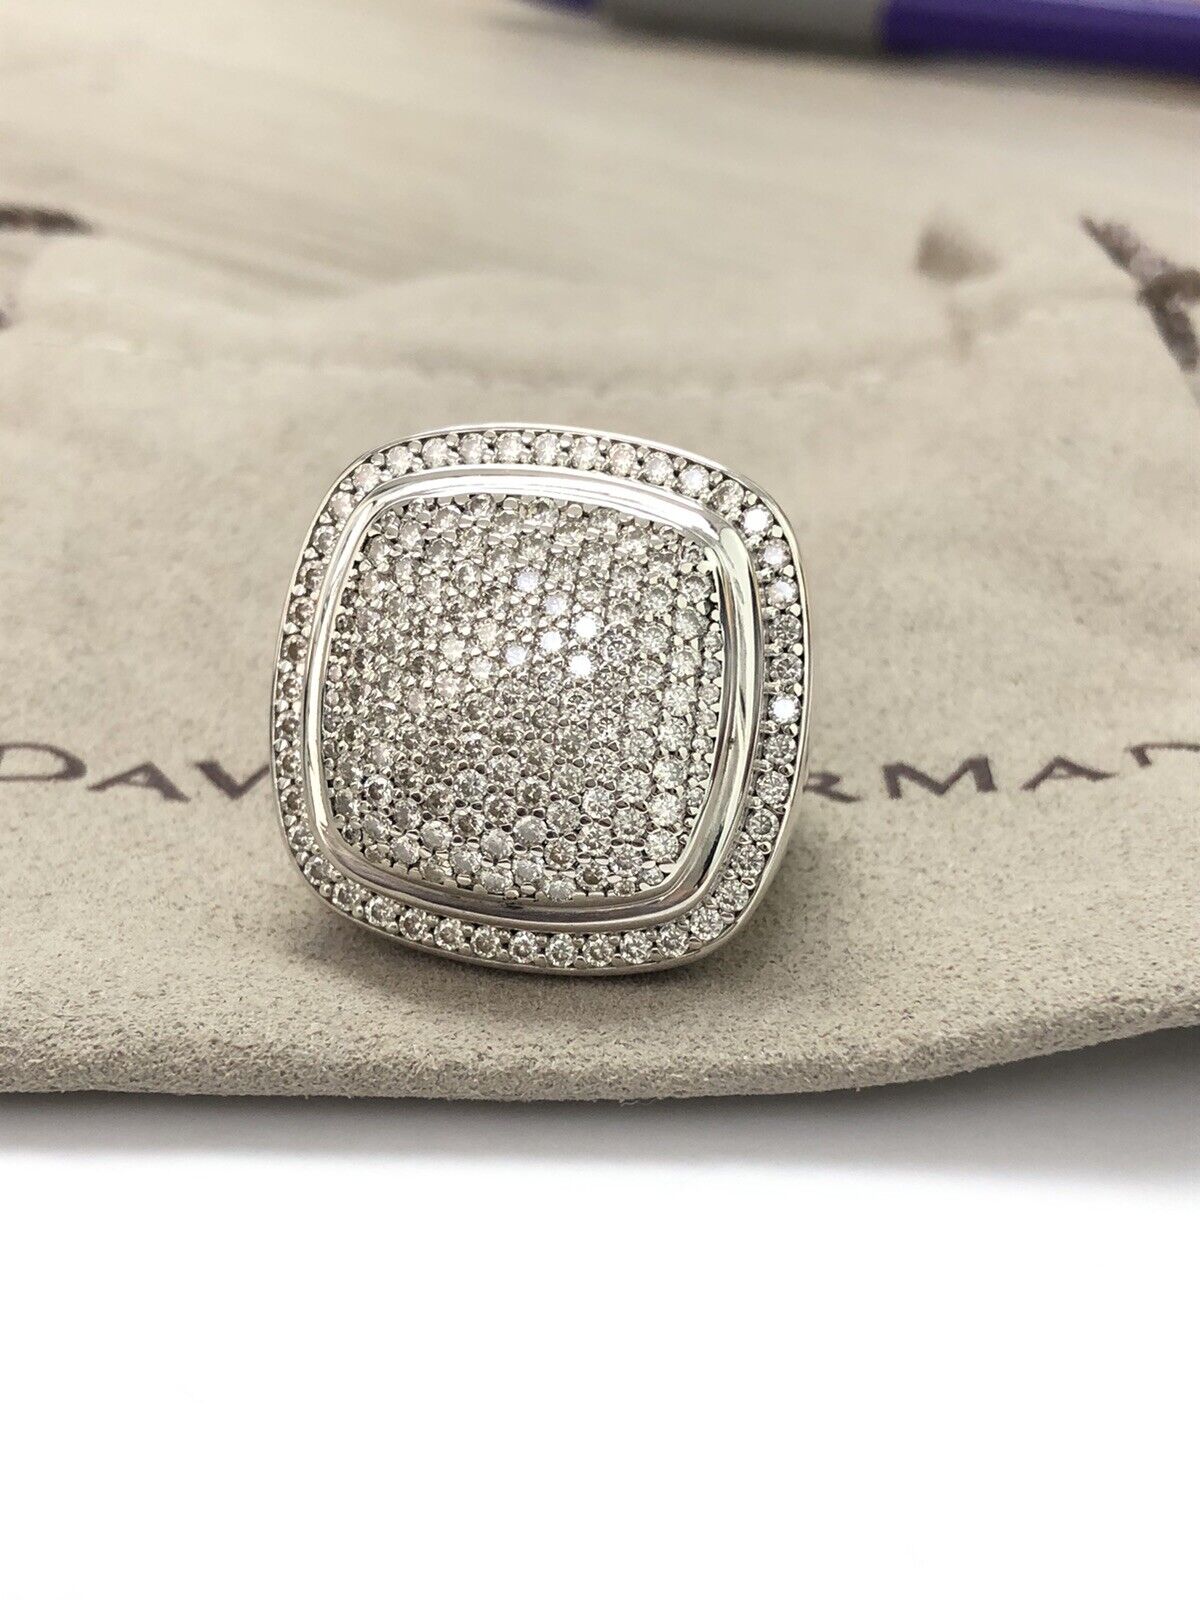 David Yurman Albion 925 Silver 20mm Albion With Pave Diamond Ring Size 6.5